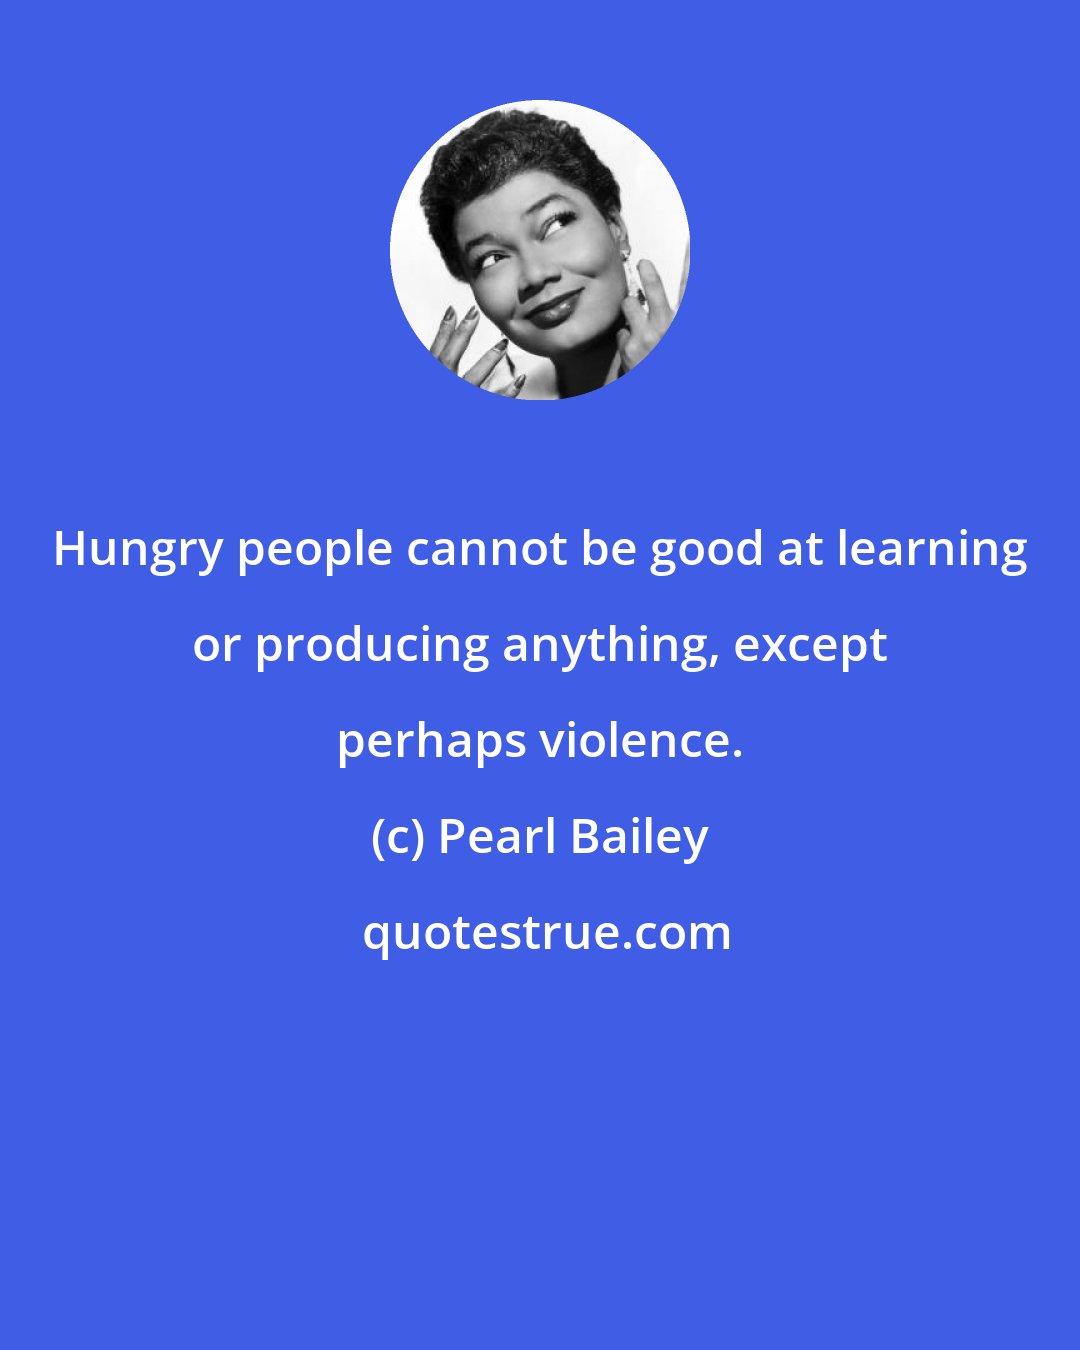 Pearl Bailey: Hungry people cannot be good at learning or producing anything, except perhaps violence.